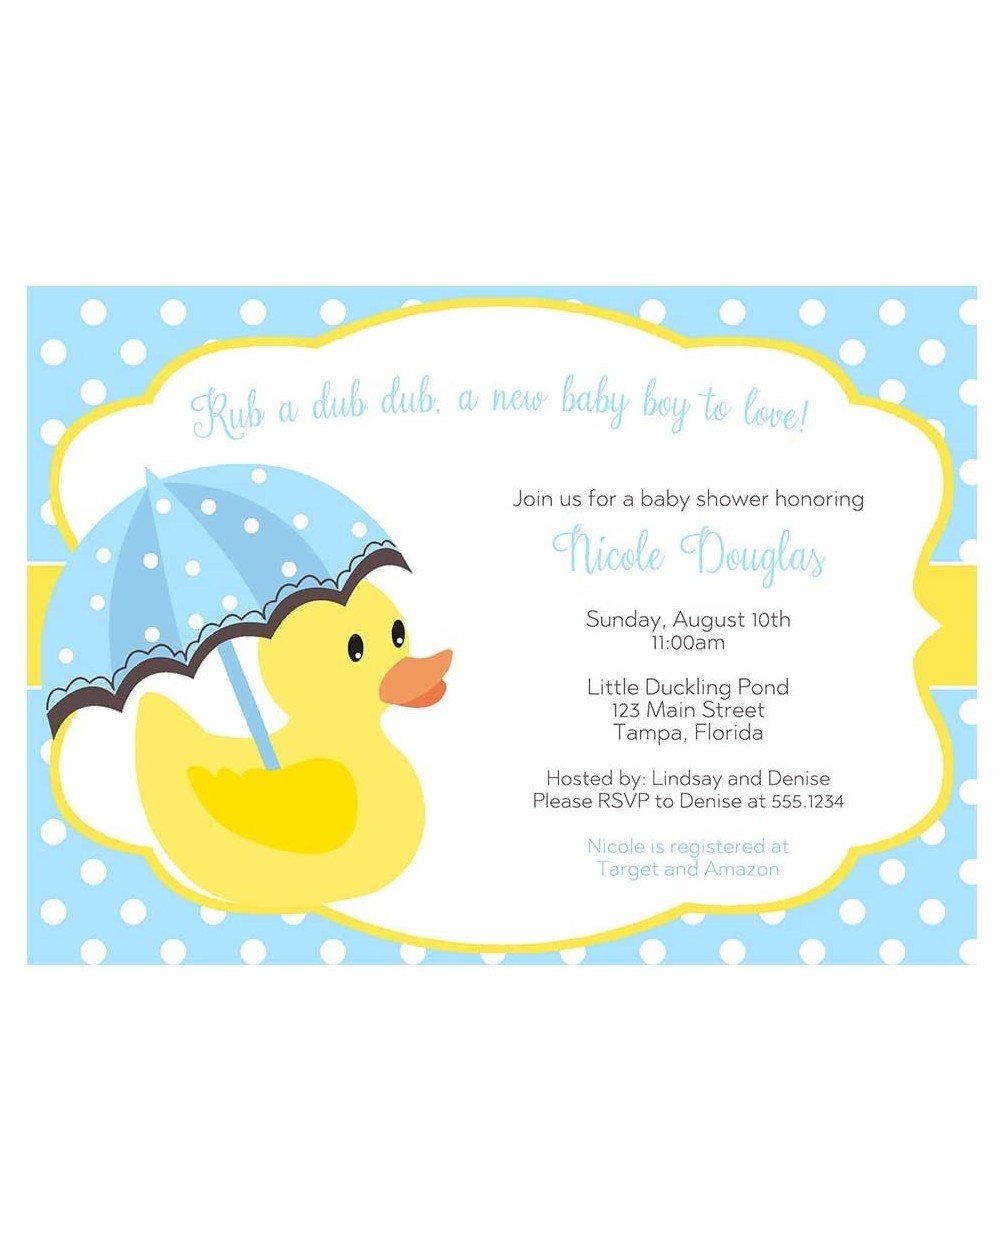 Invitations Duck Baby Shower Invitations It's a Boy Invites Rubber Ducky Polka Dots Blue Yellow Sprinkle Personalized Printed...